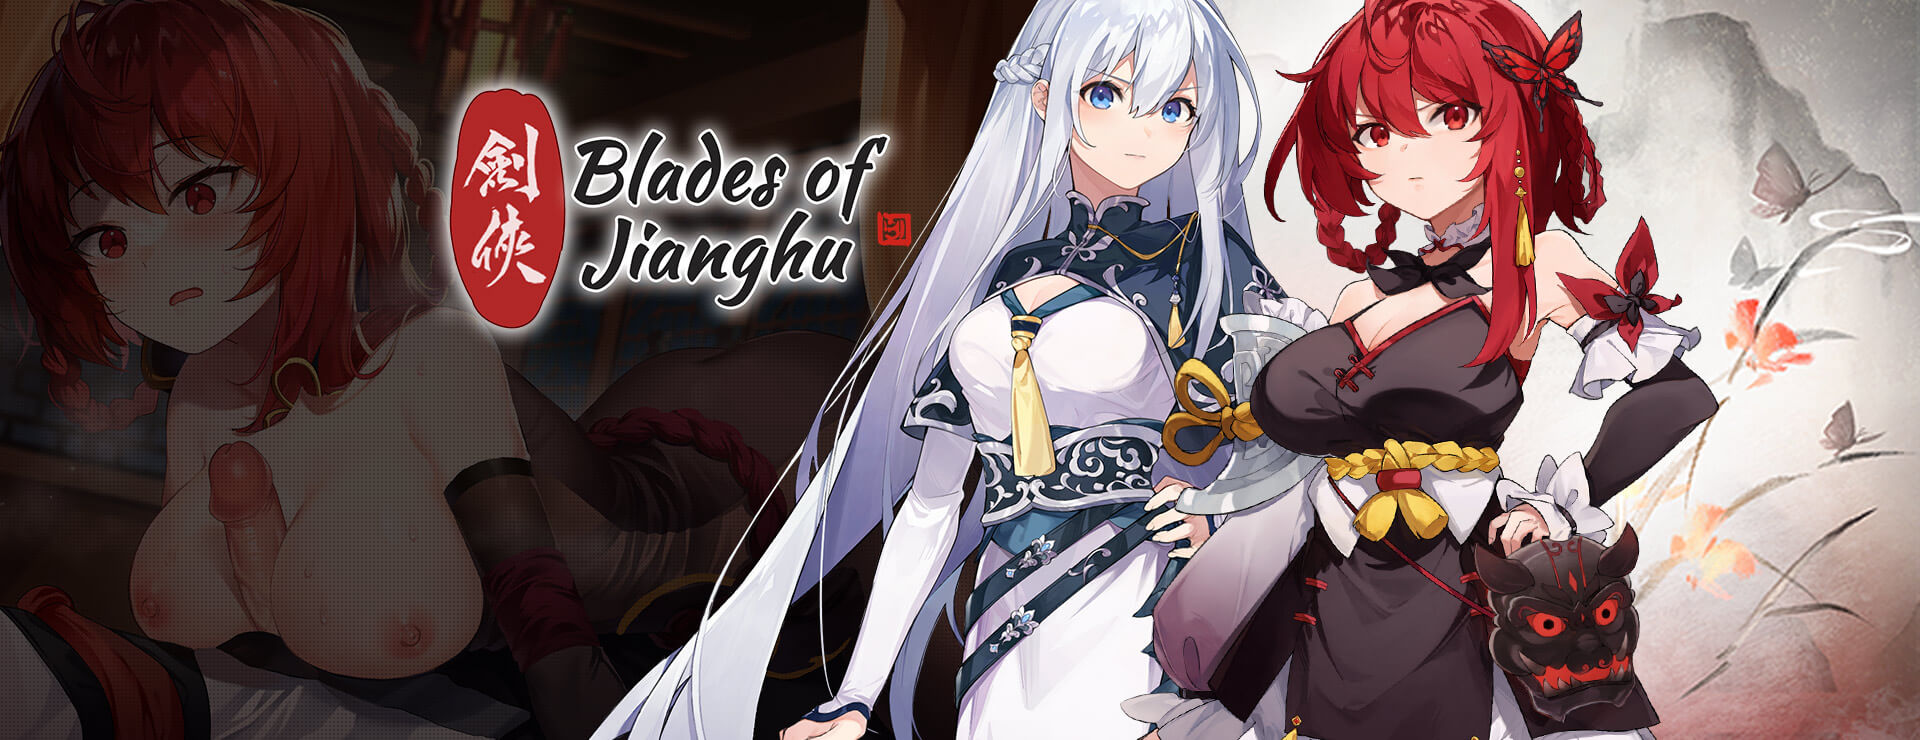 Blades of Jianghu: Ballad of Wind and Dust - 角色扮演 遊戲